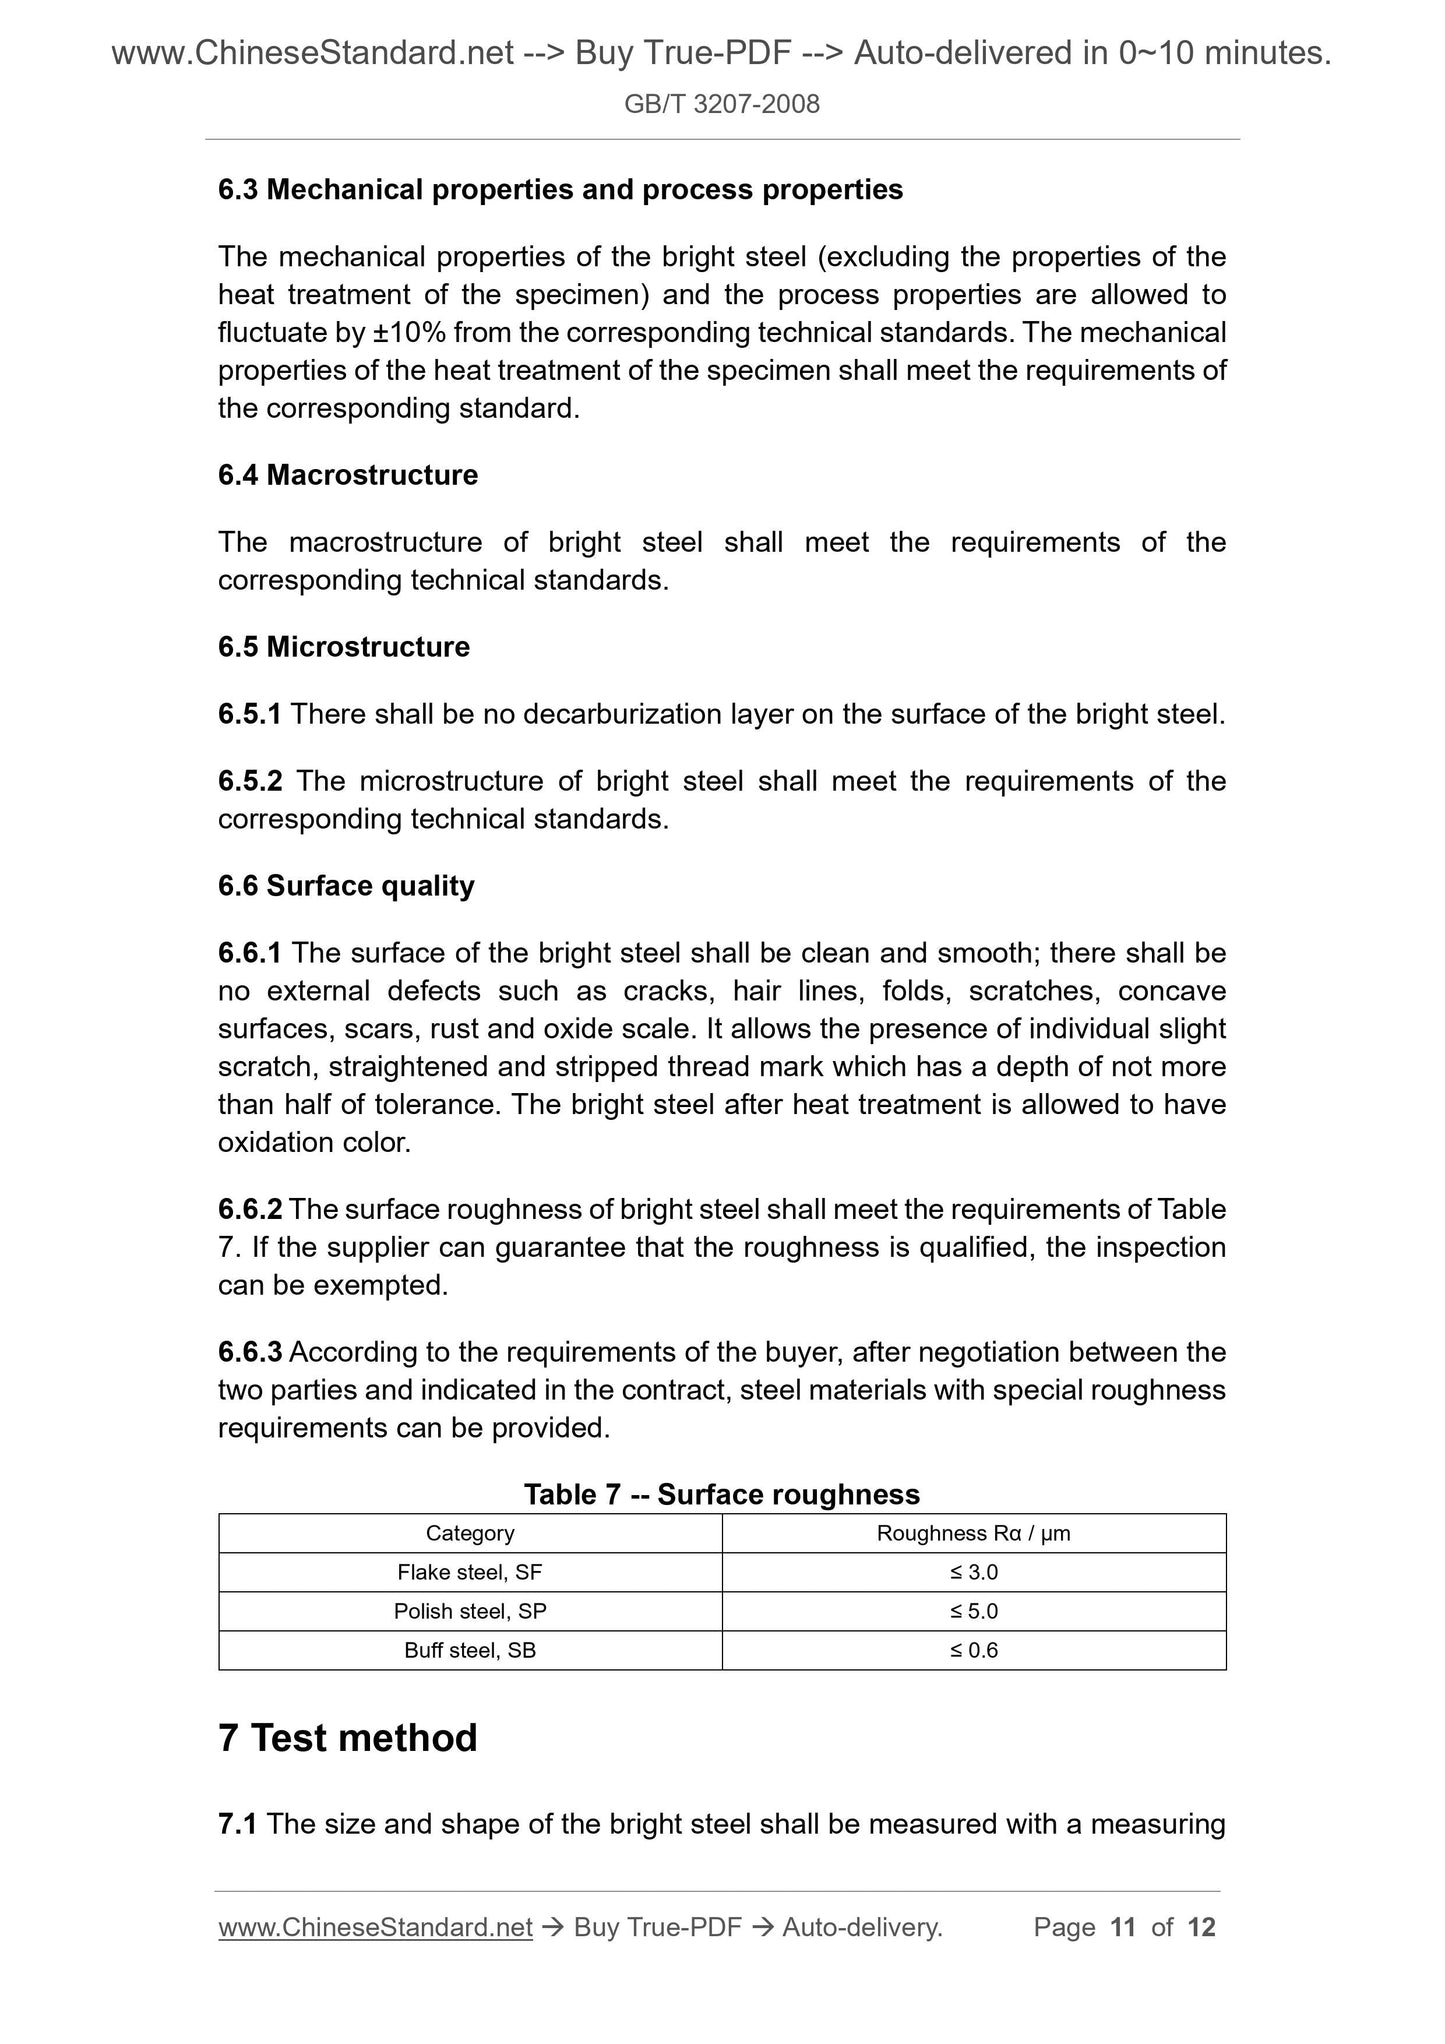 GB/T 3207-2008 Page 4